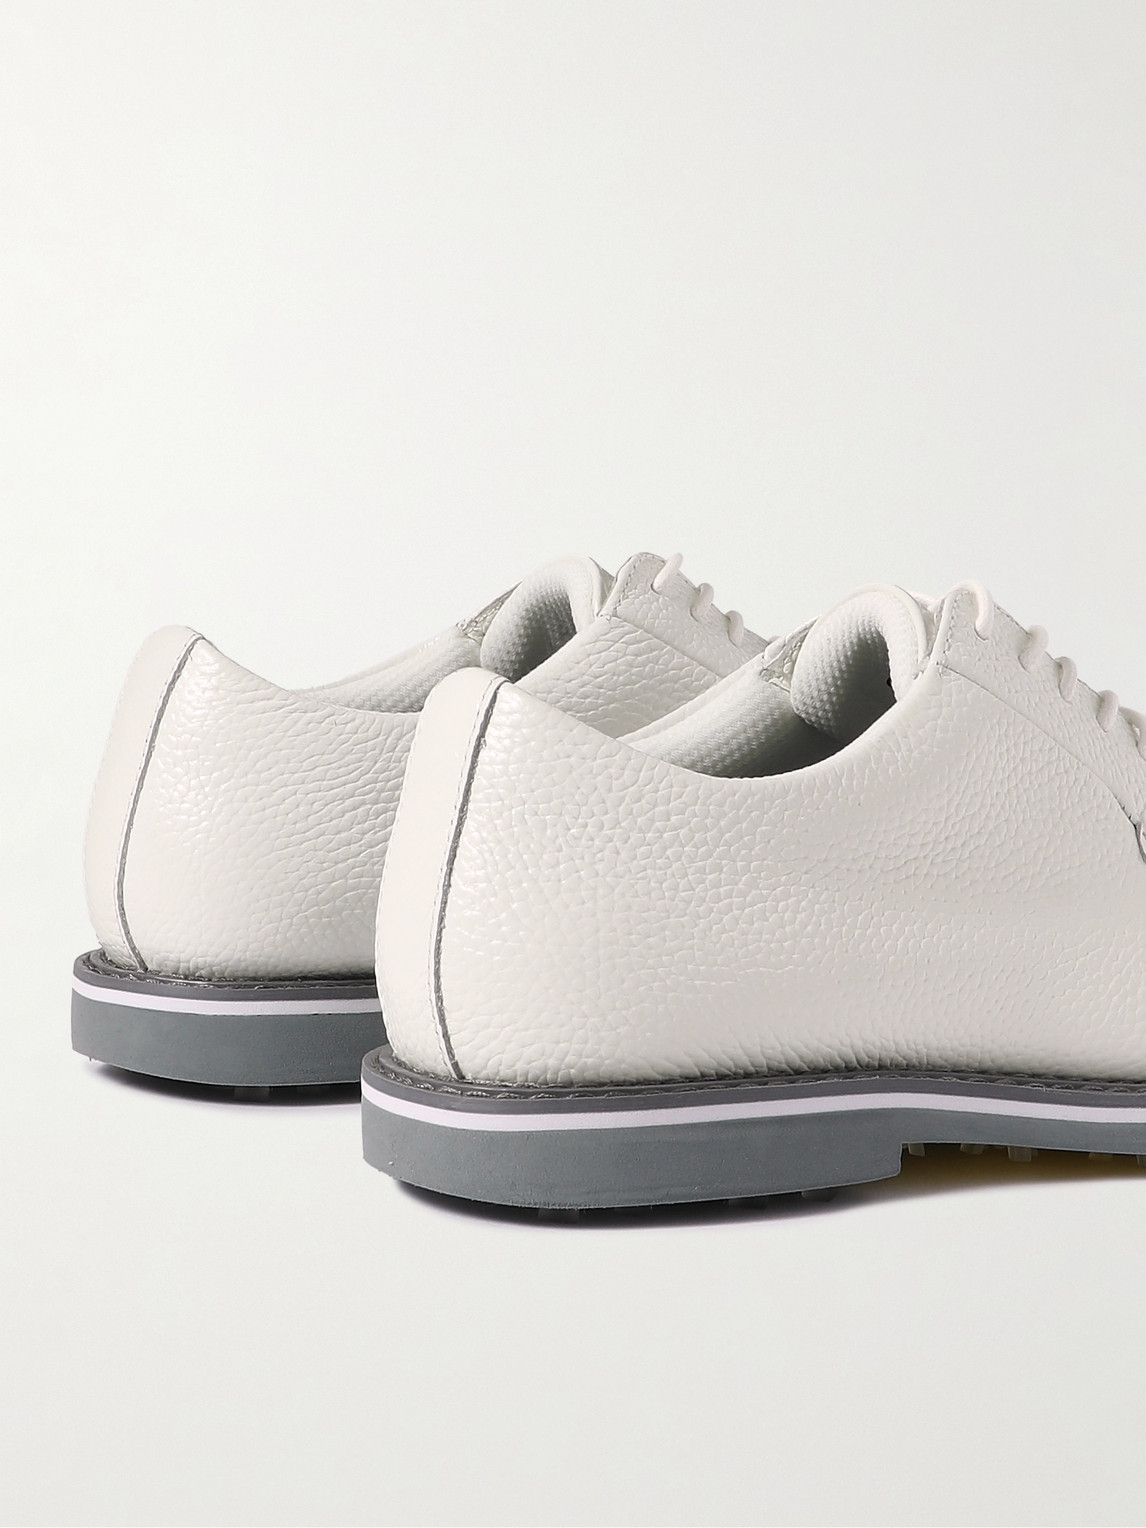 Shop G/fore Gallivanter Pebble-grain Leather Golf Shoes In White